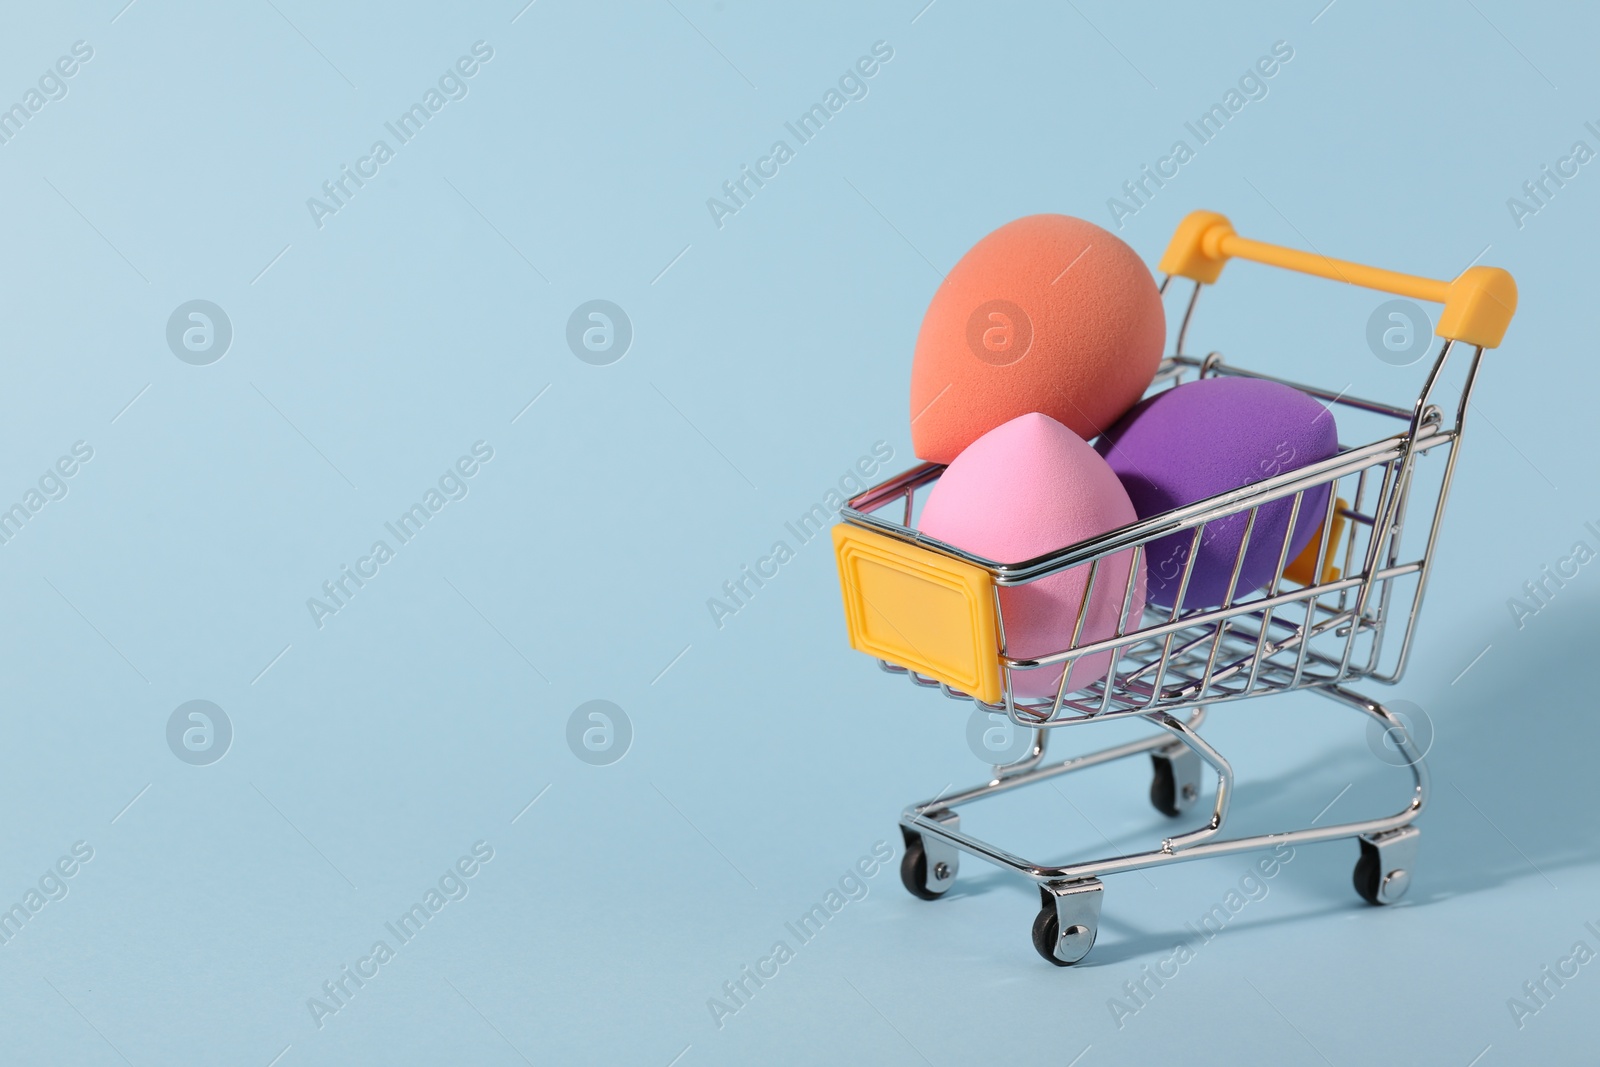 Photo of Makeup sponges in small shopping cart on light blue background. Space for text